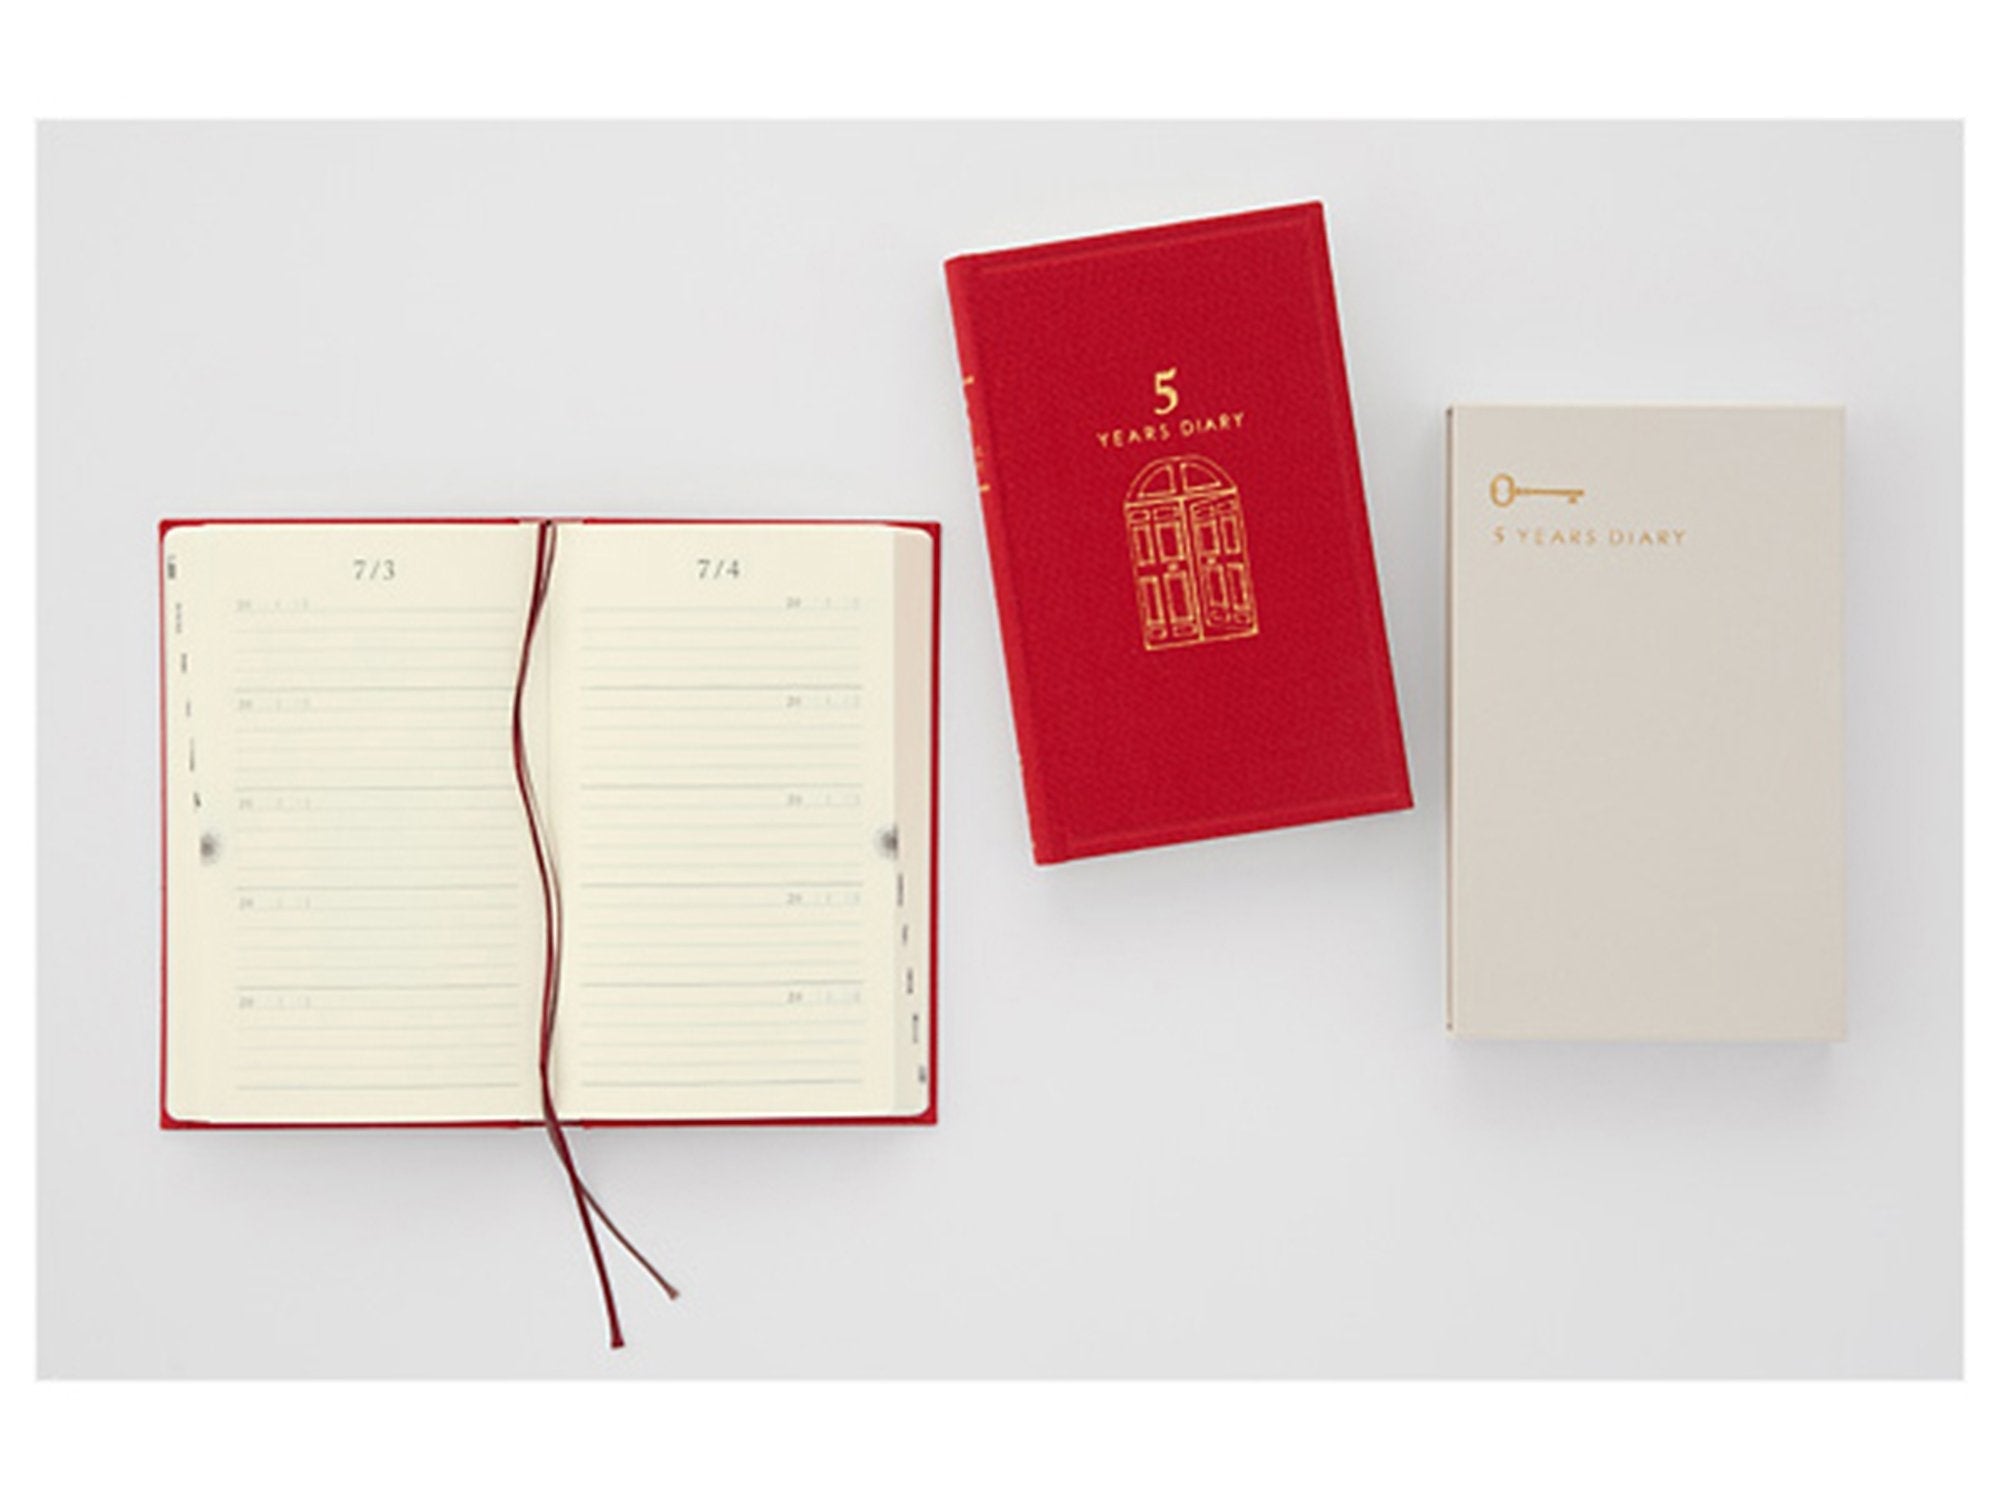 5-Year Diary Recycled Leather Red